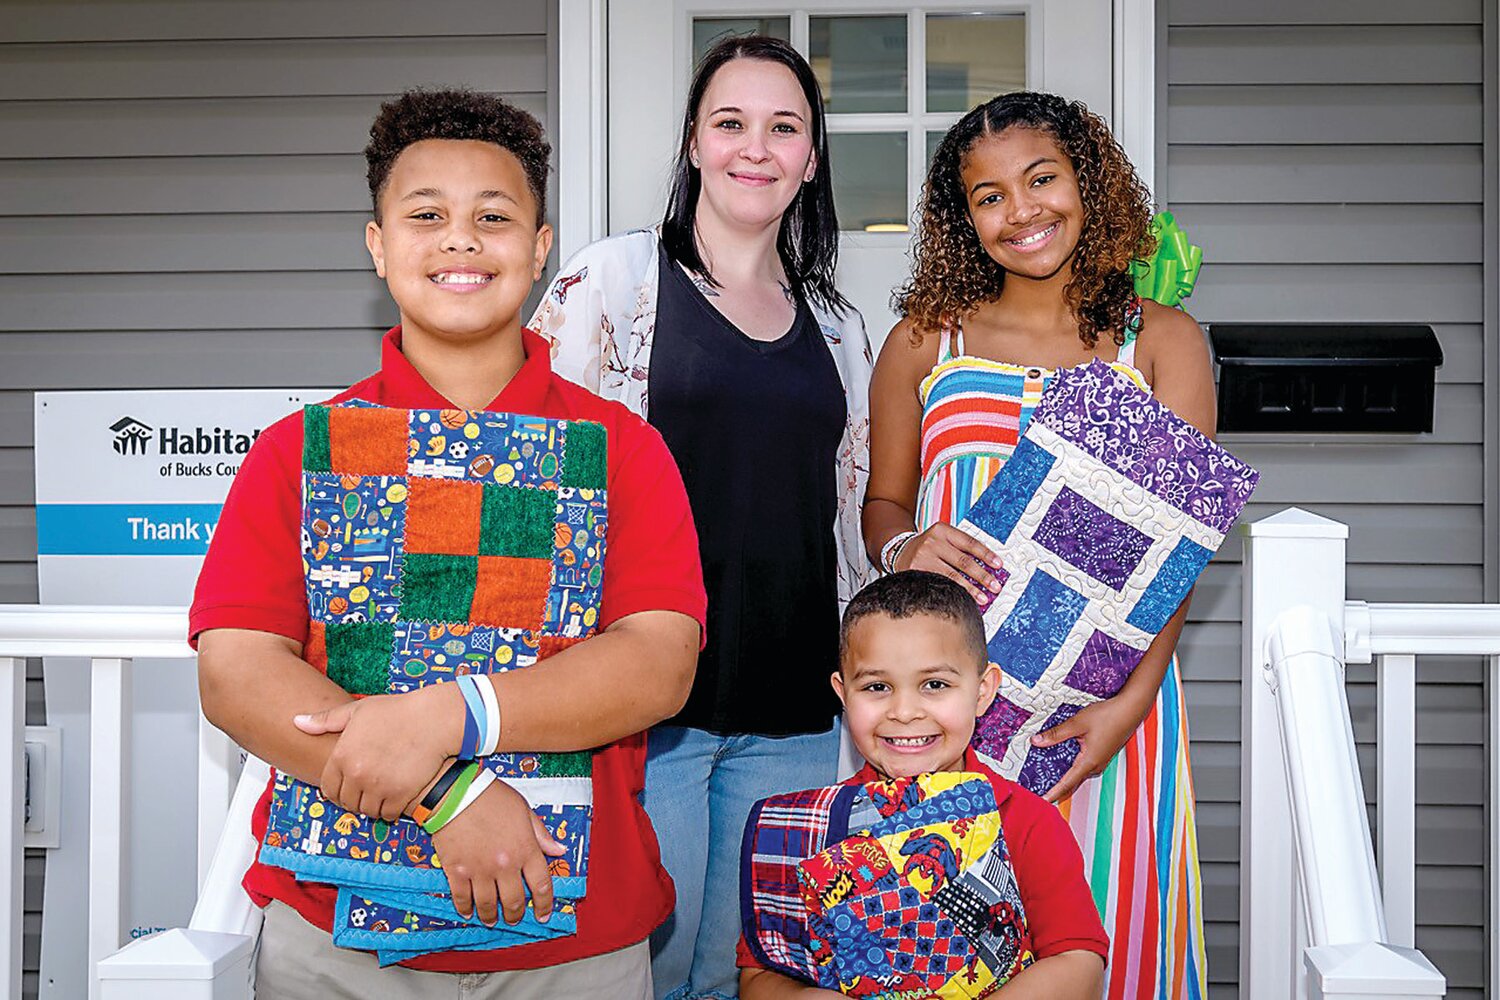 Danielle, as a single mother of three, has always dreamed of being able to provide her family with a house of their own. Now, thanks to Habitat for Humanity, she has.